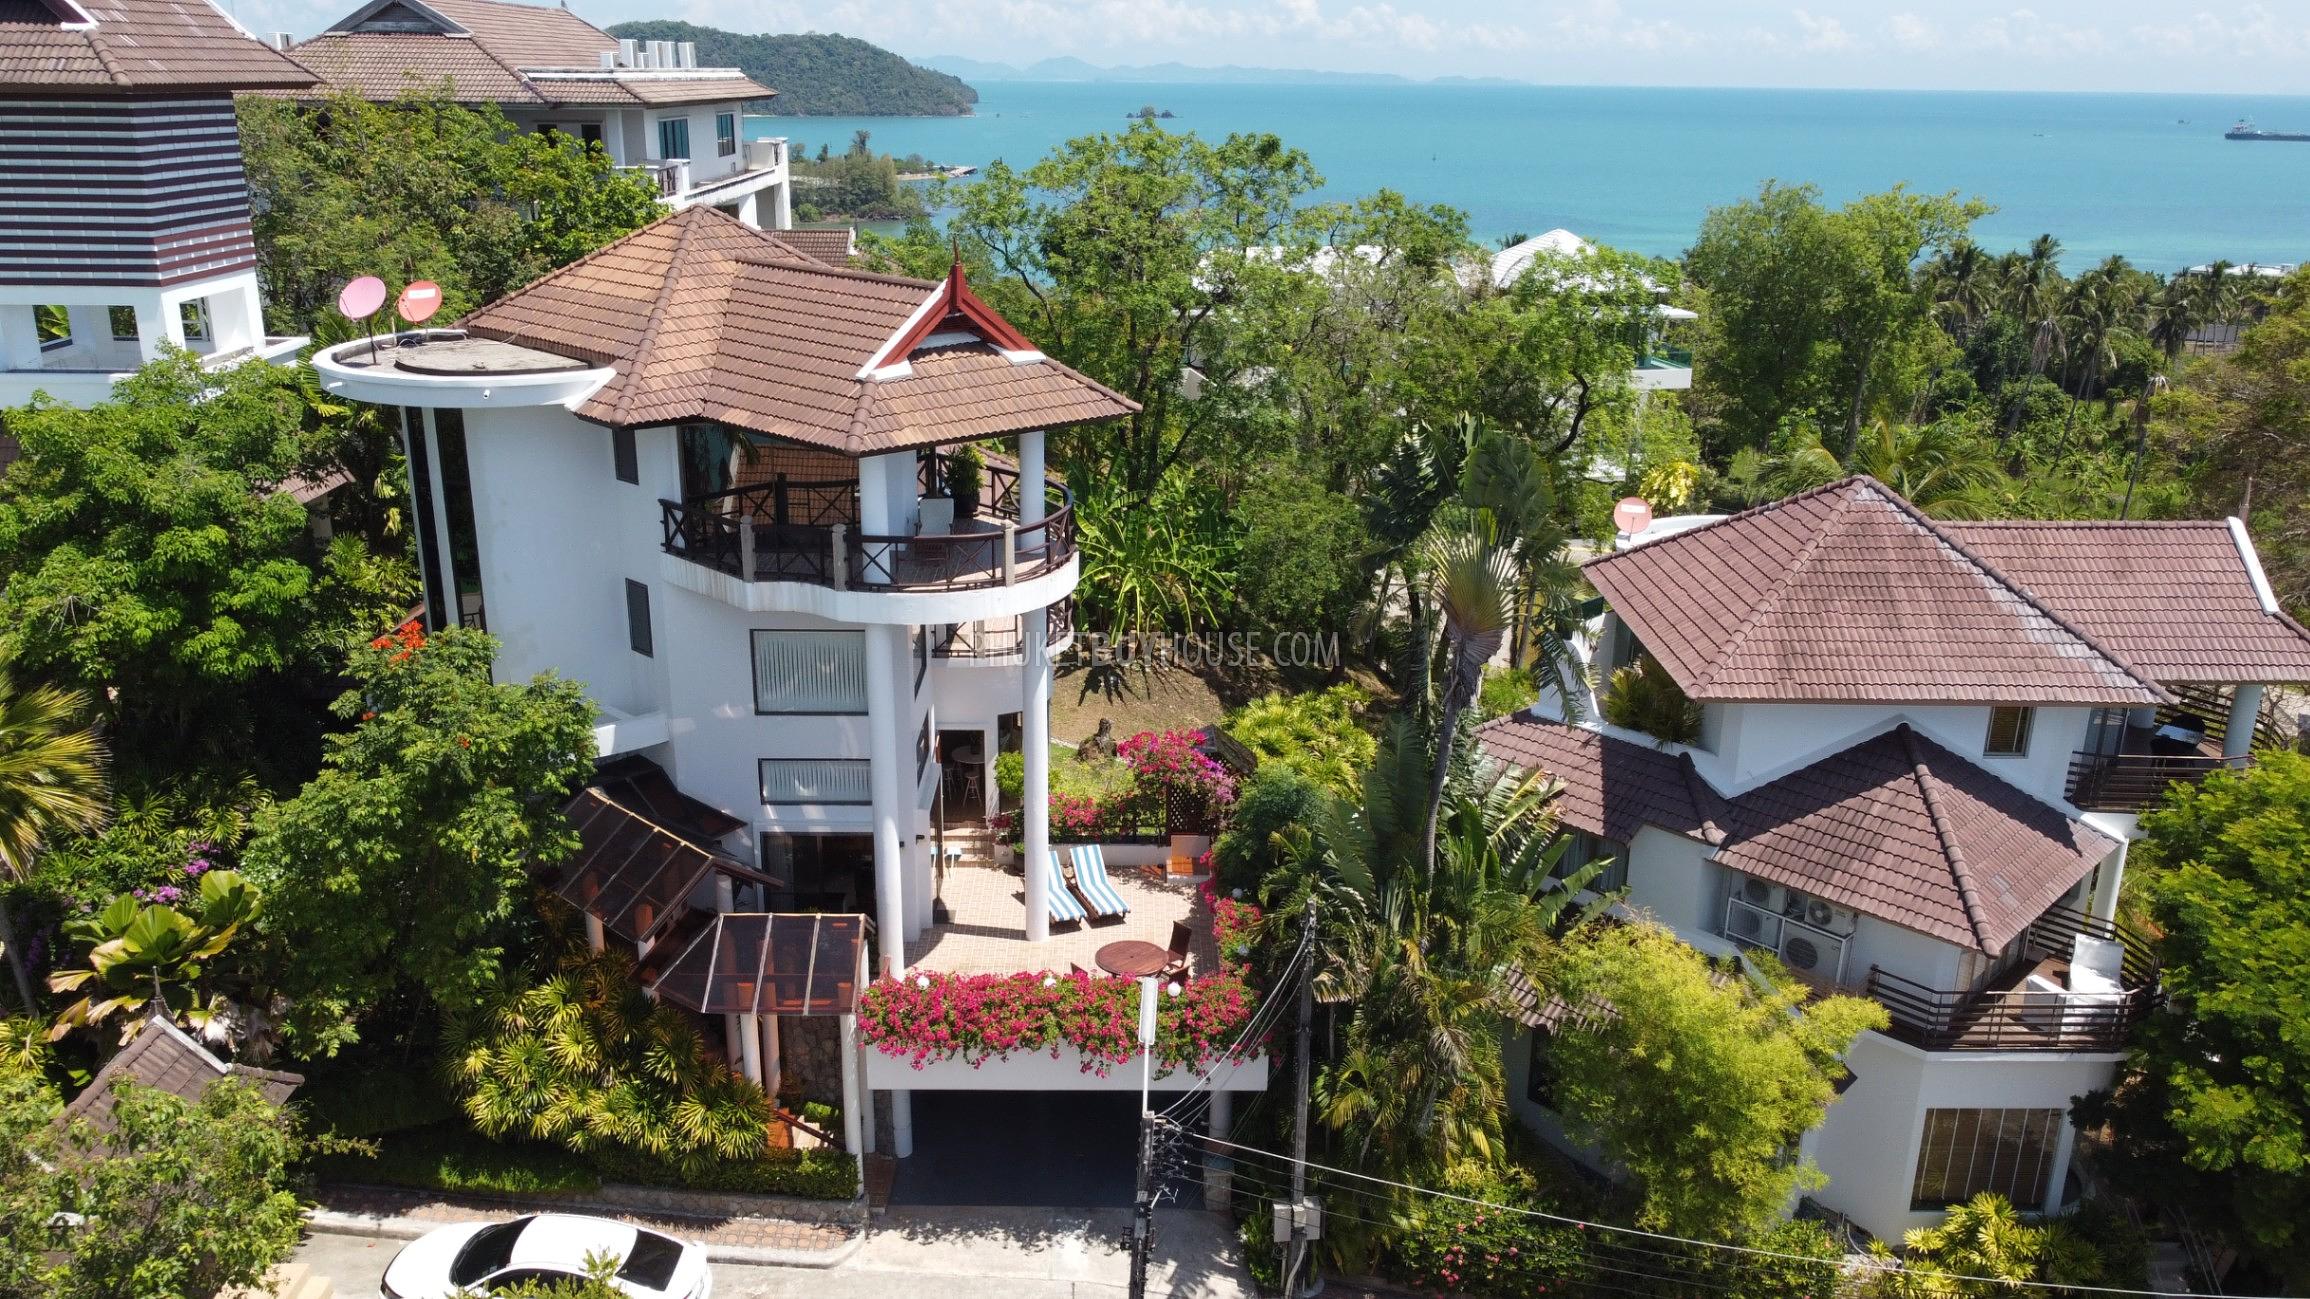 PAN21953: Stunning Three-Bedroom House For Sale With Magnificent Views of Ao Yon Bay and Racha Islands. Photo #1